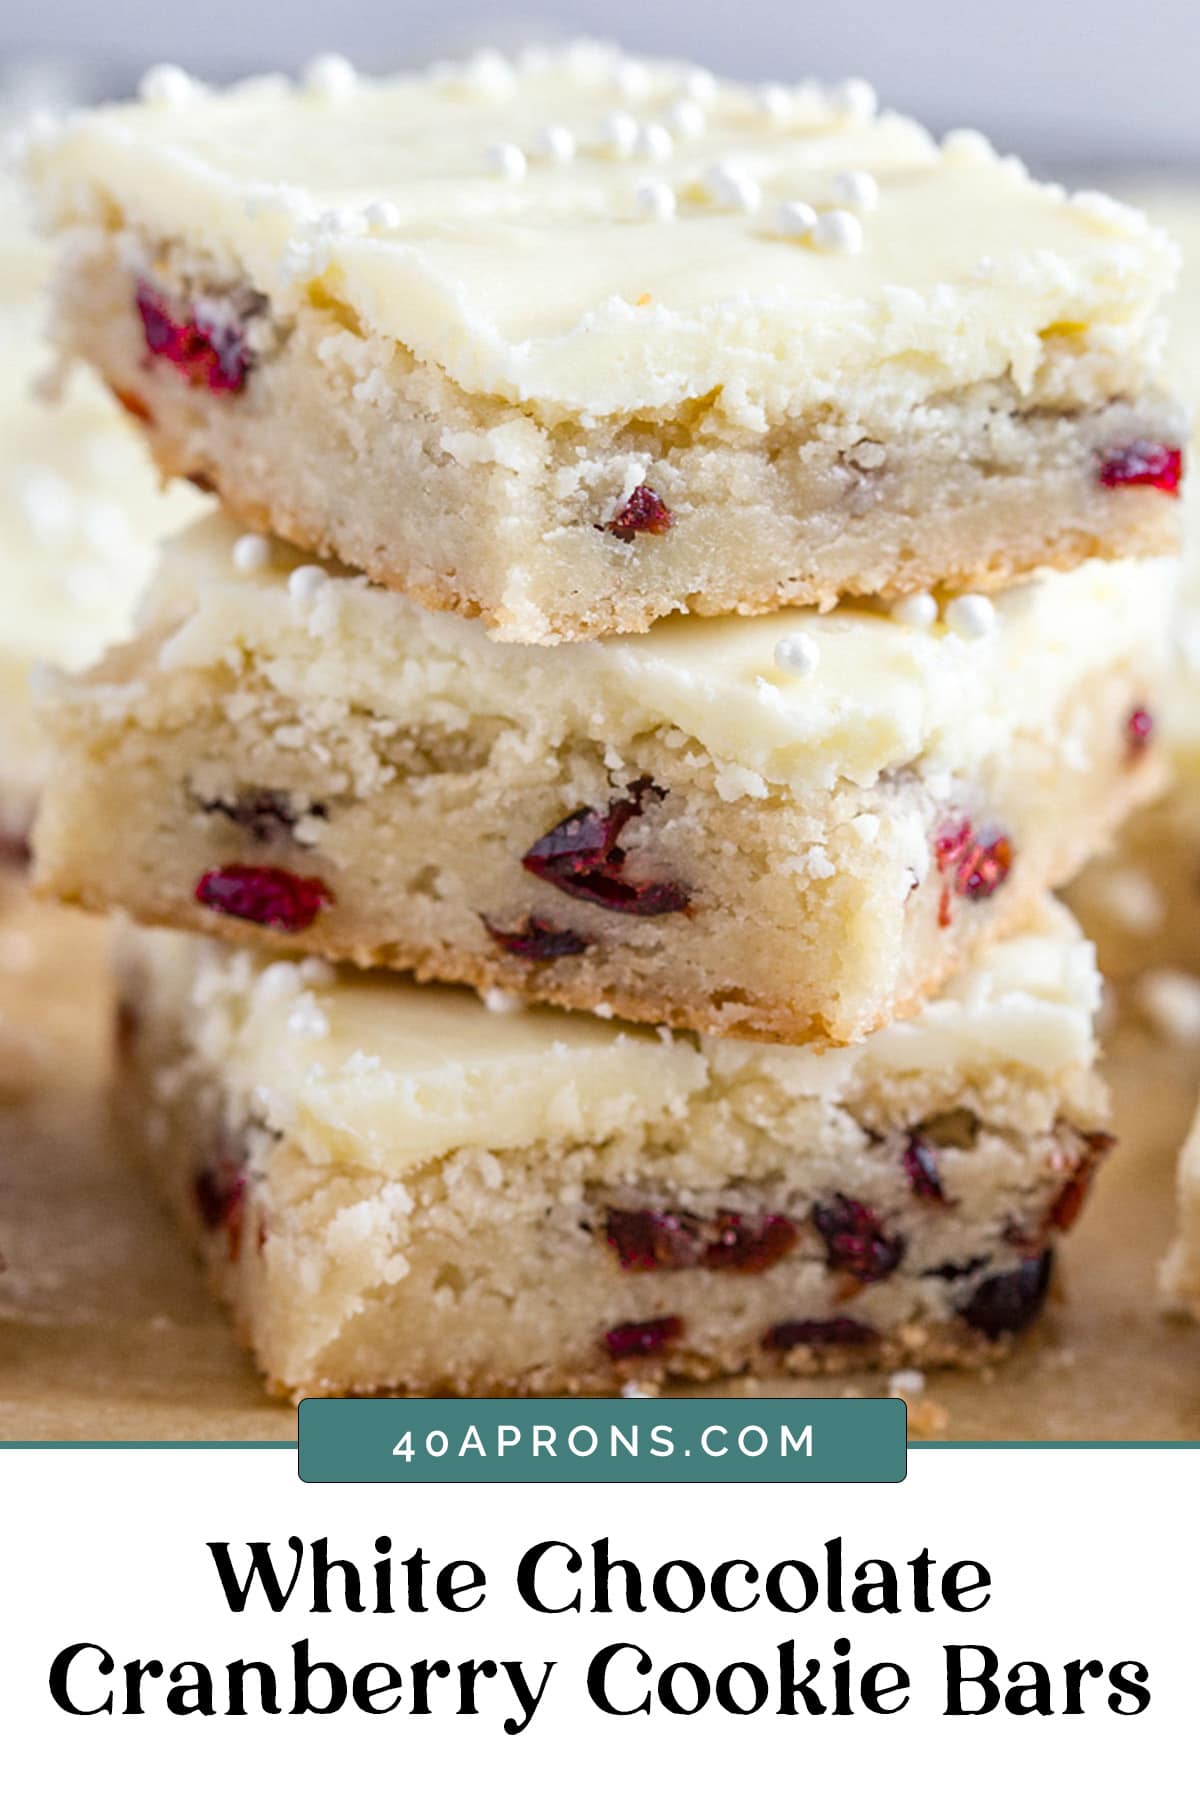 Graphic for cranberry white chocolate cookie bars.